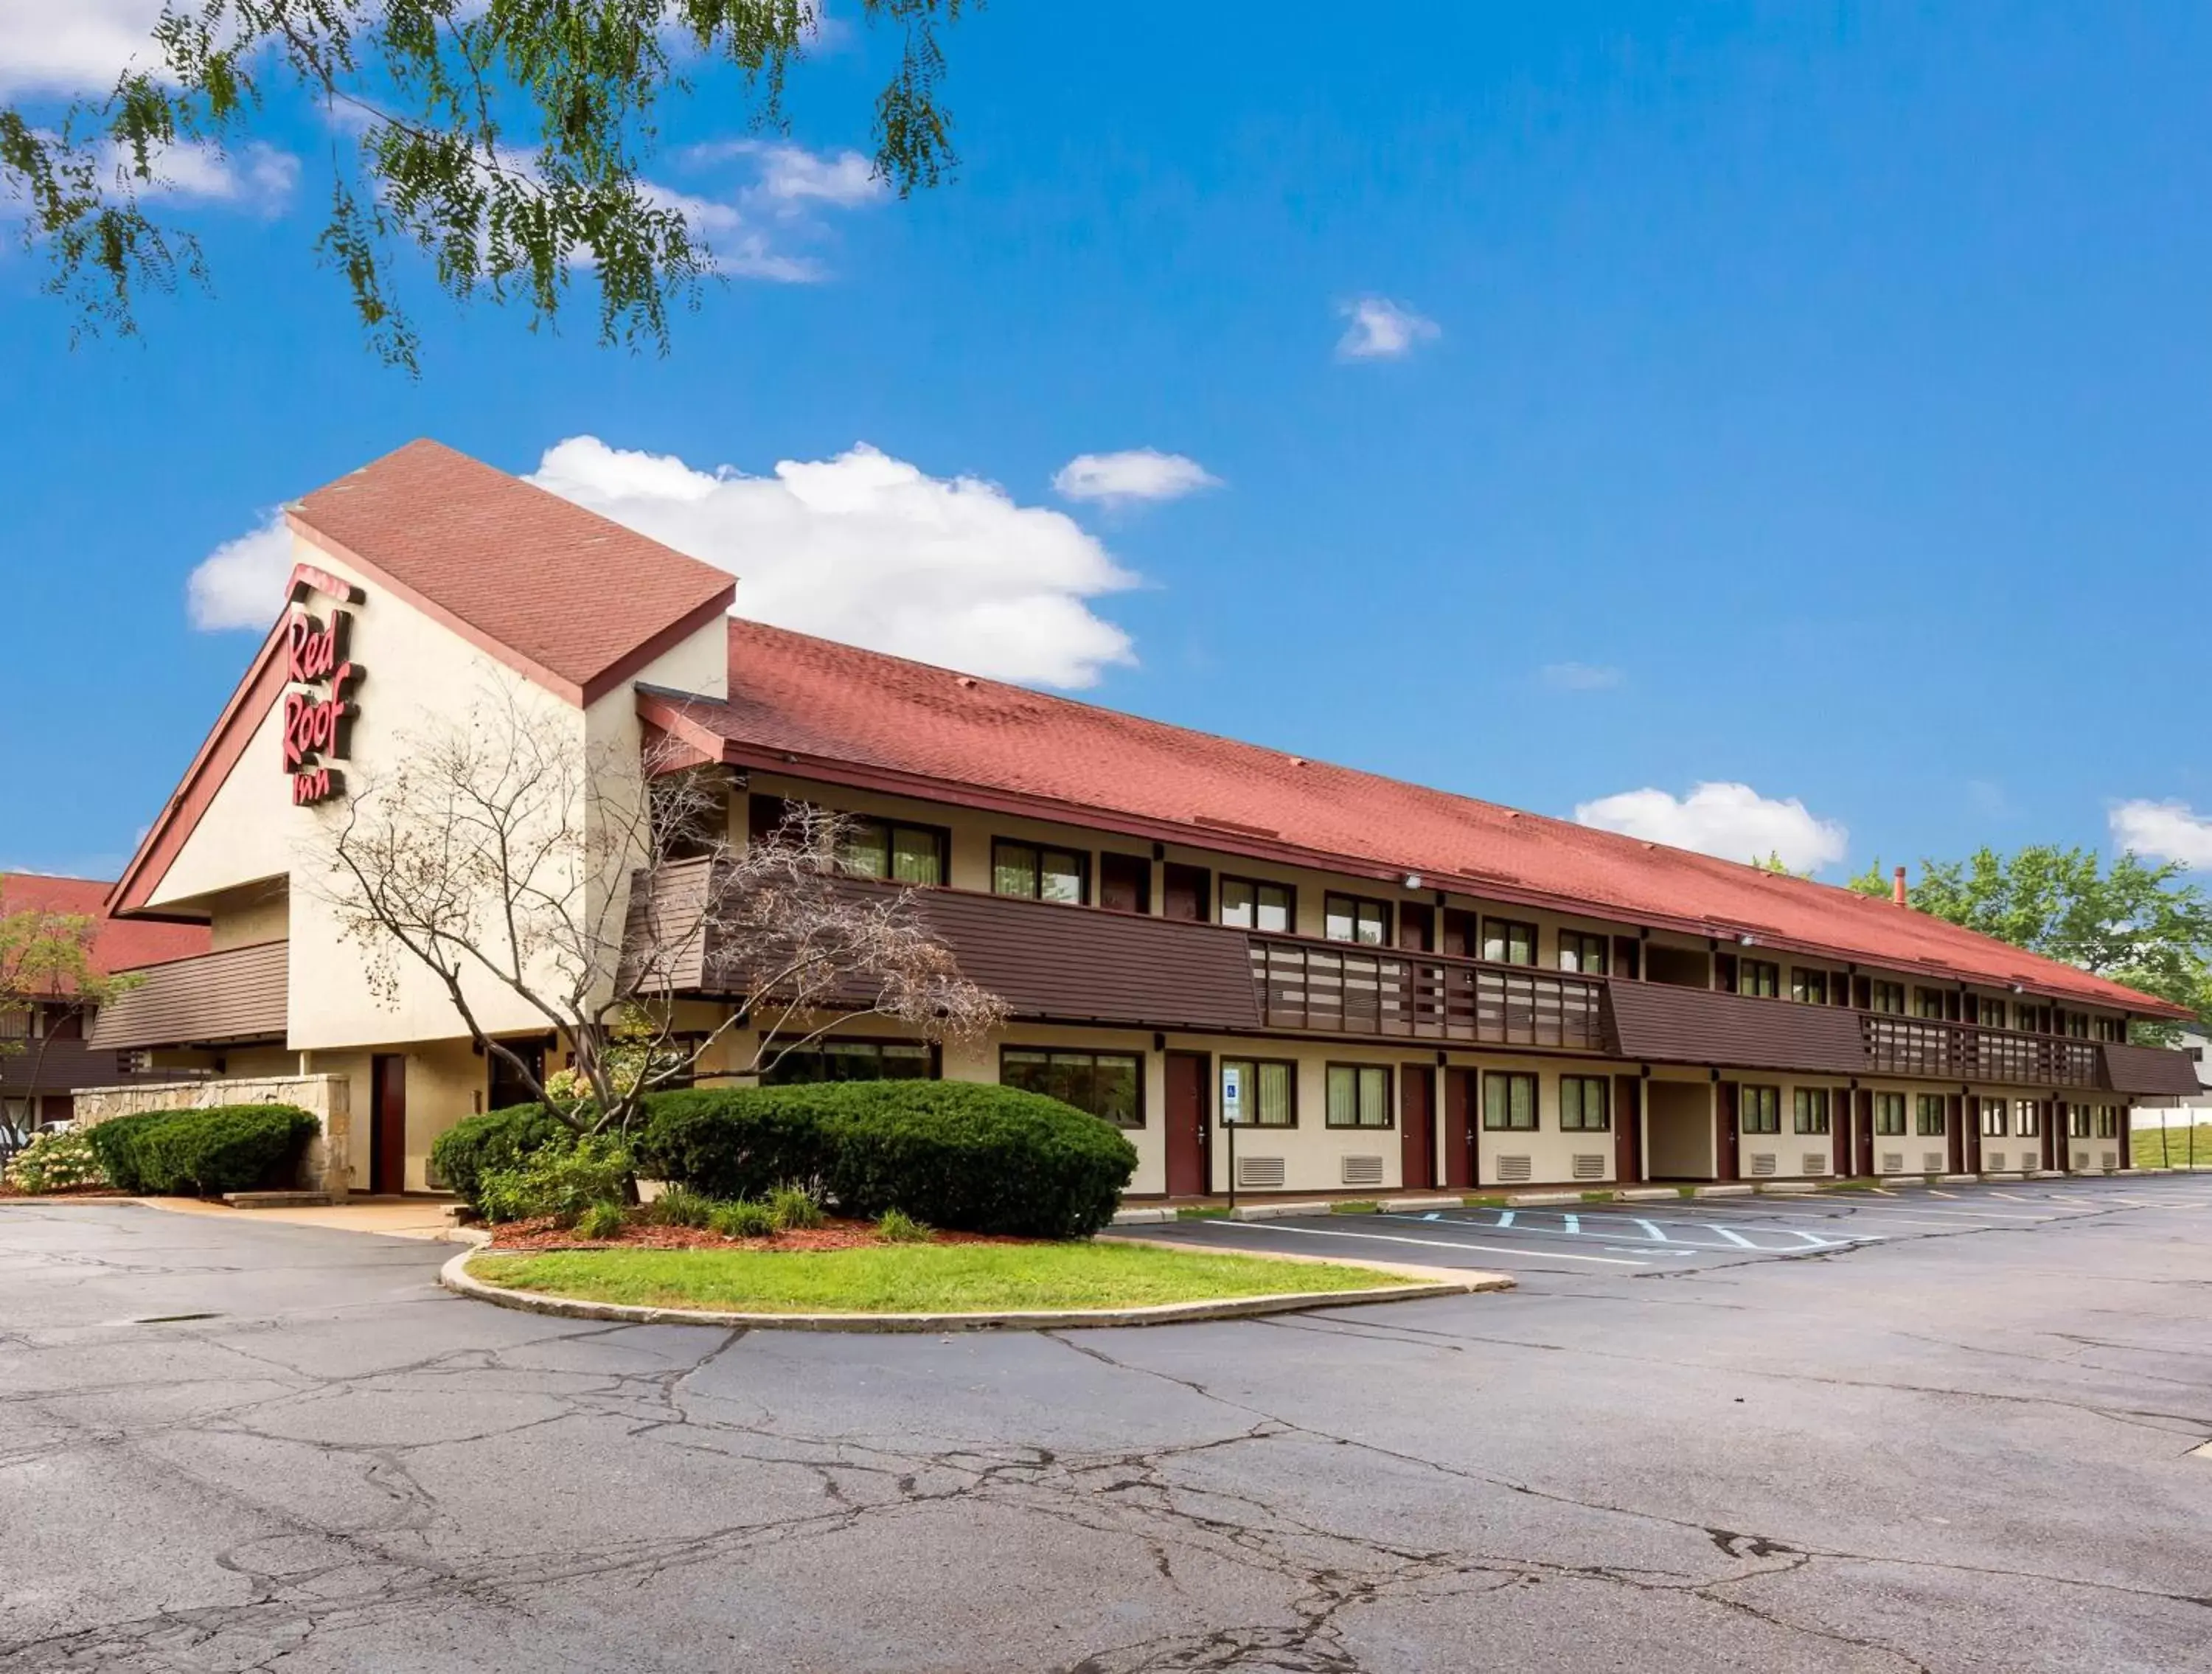 Property Building in Red Roof Inn Detroit - Plymouth/Canton